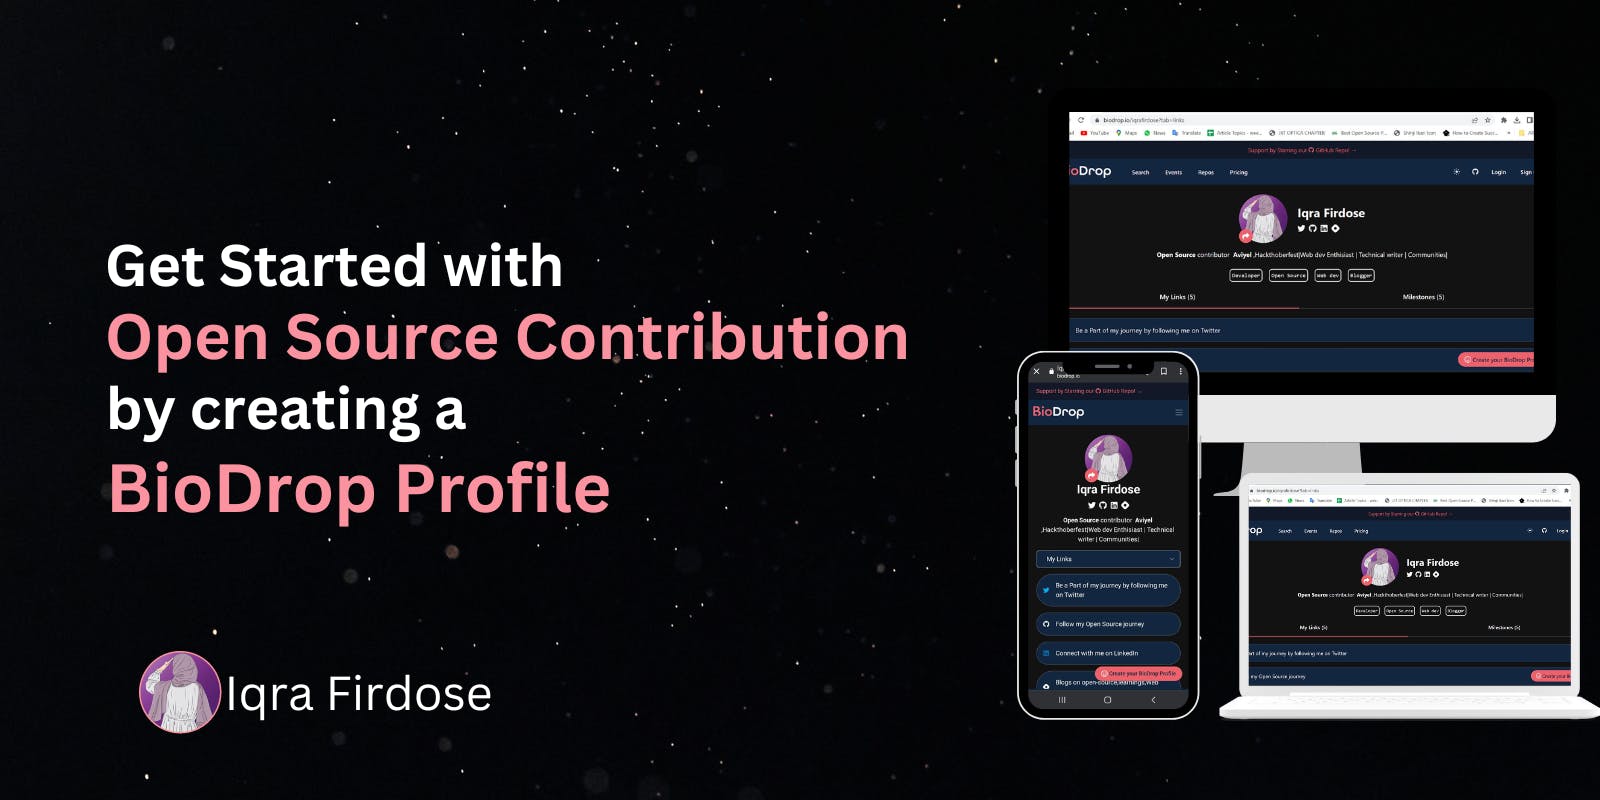 Get started with an open-source contribution by creating a BioDrop Profile